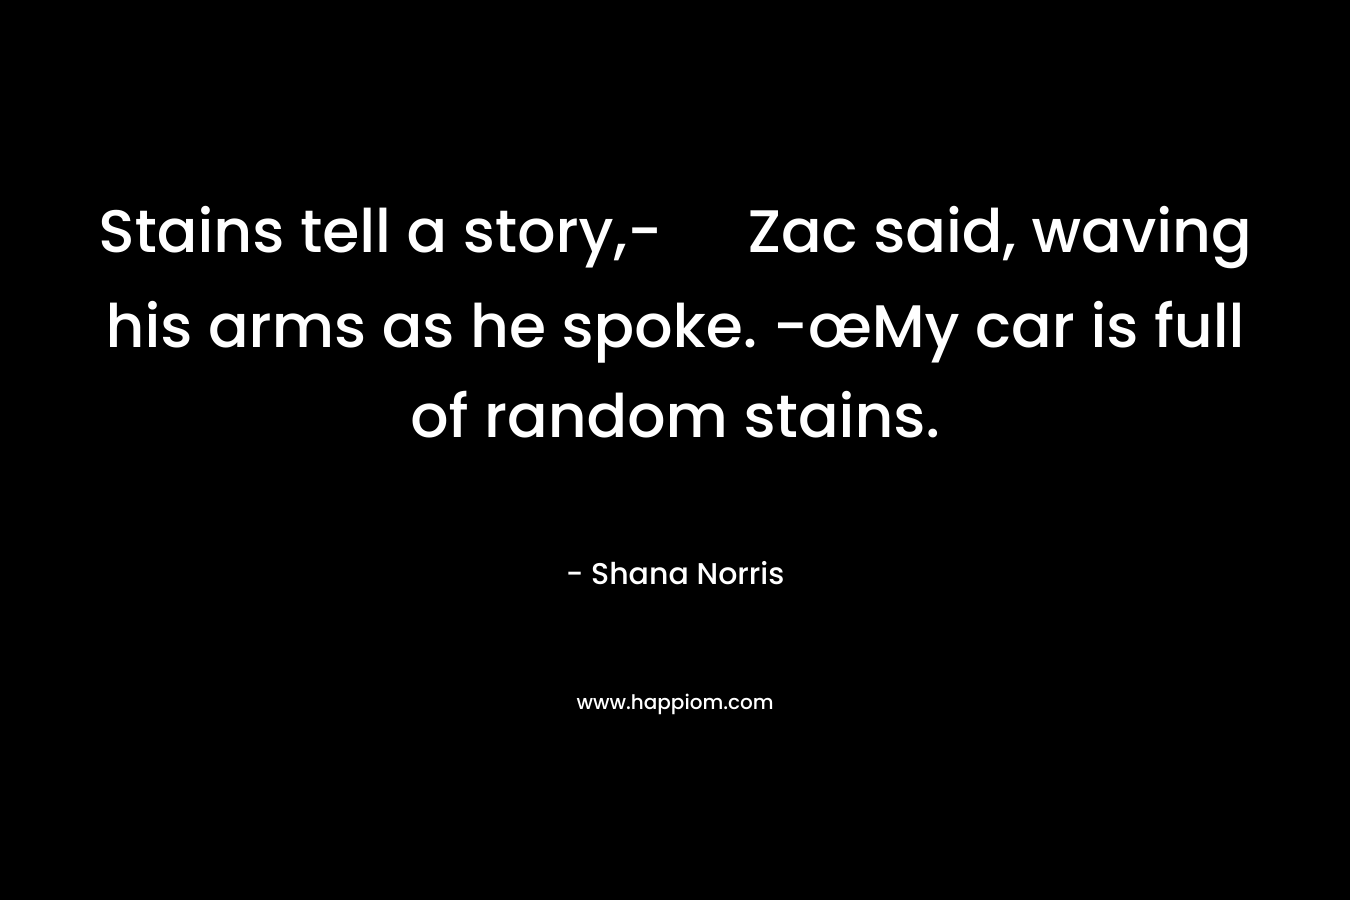 Stains tell a story,- Zac said, waving his arms as he spoke. -œMy car is full of random stains.